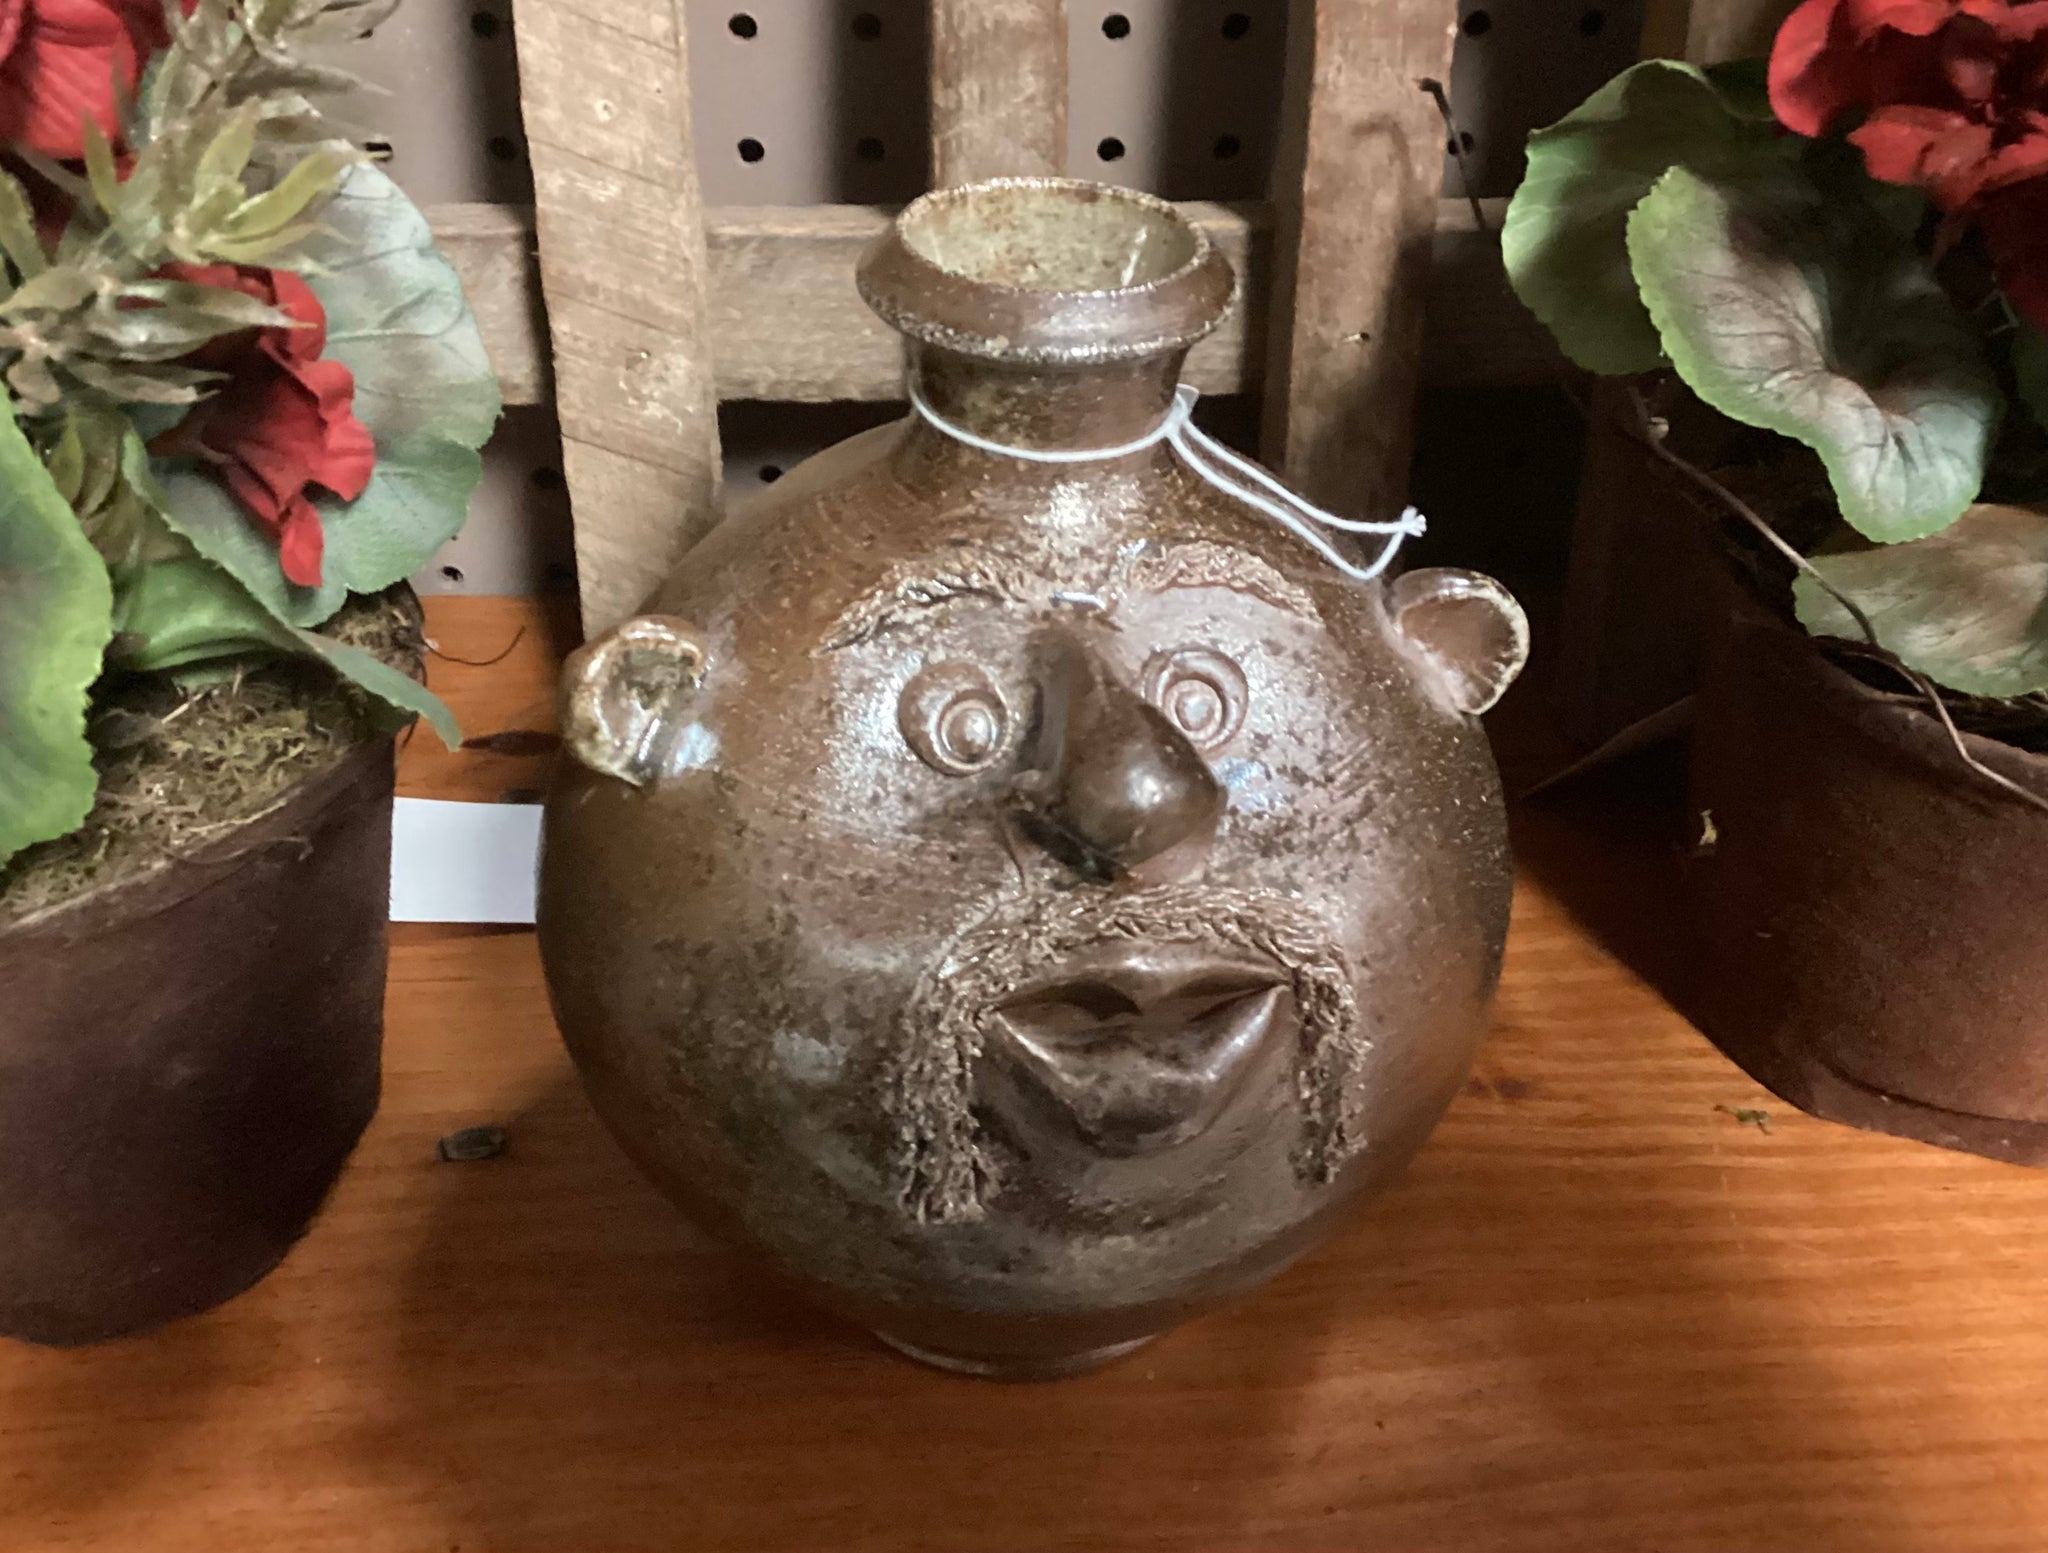 Hand Crafted and Signed by Artist "Fu Manchu" Pottery Face Jug